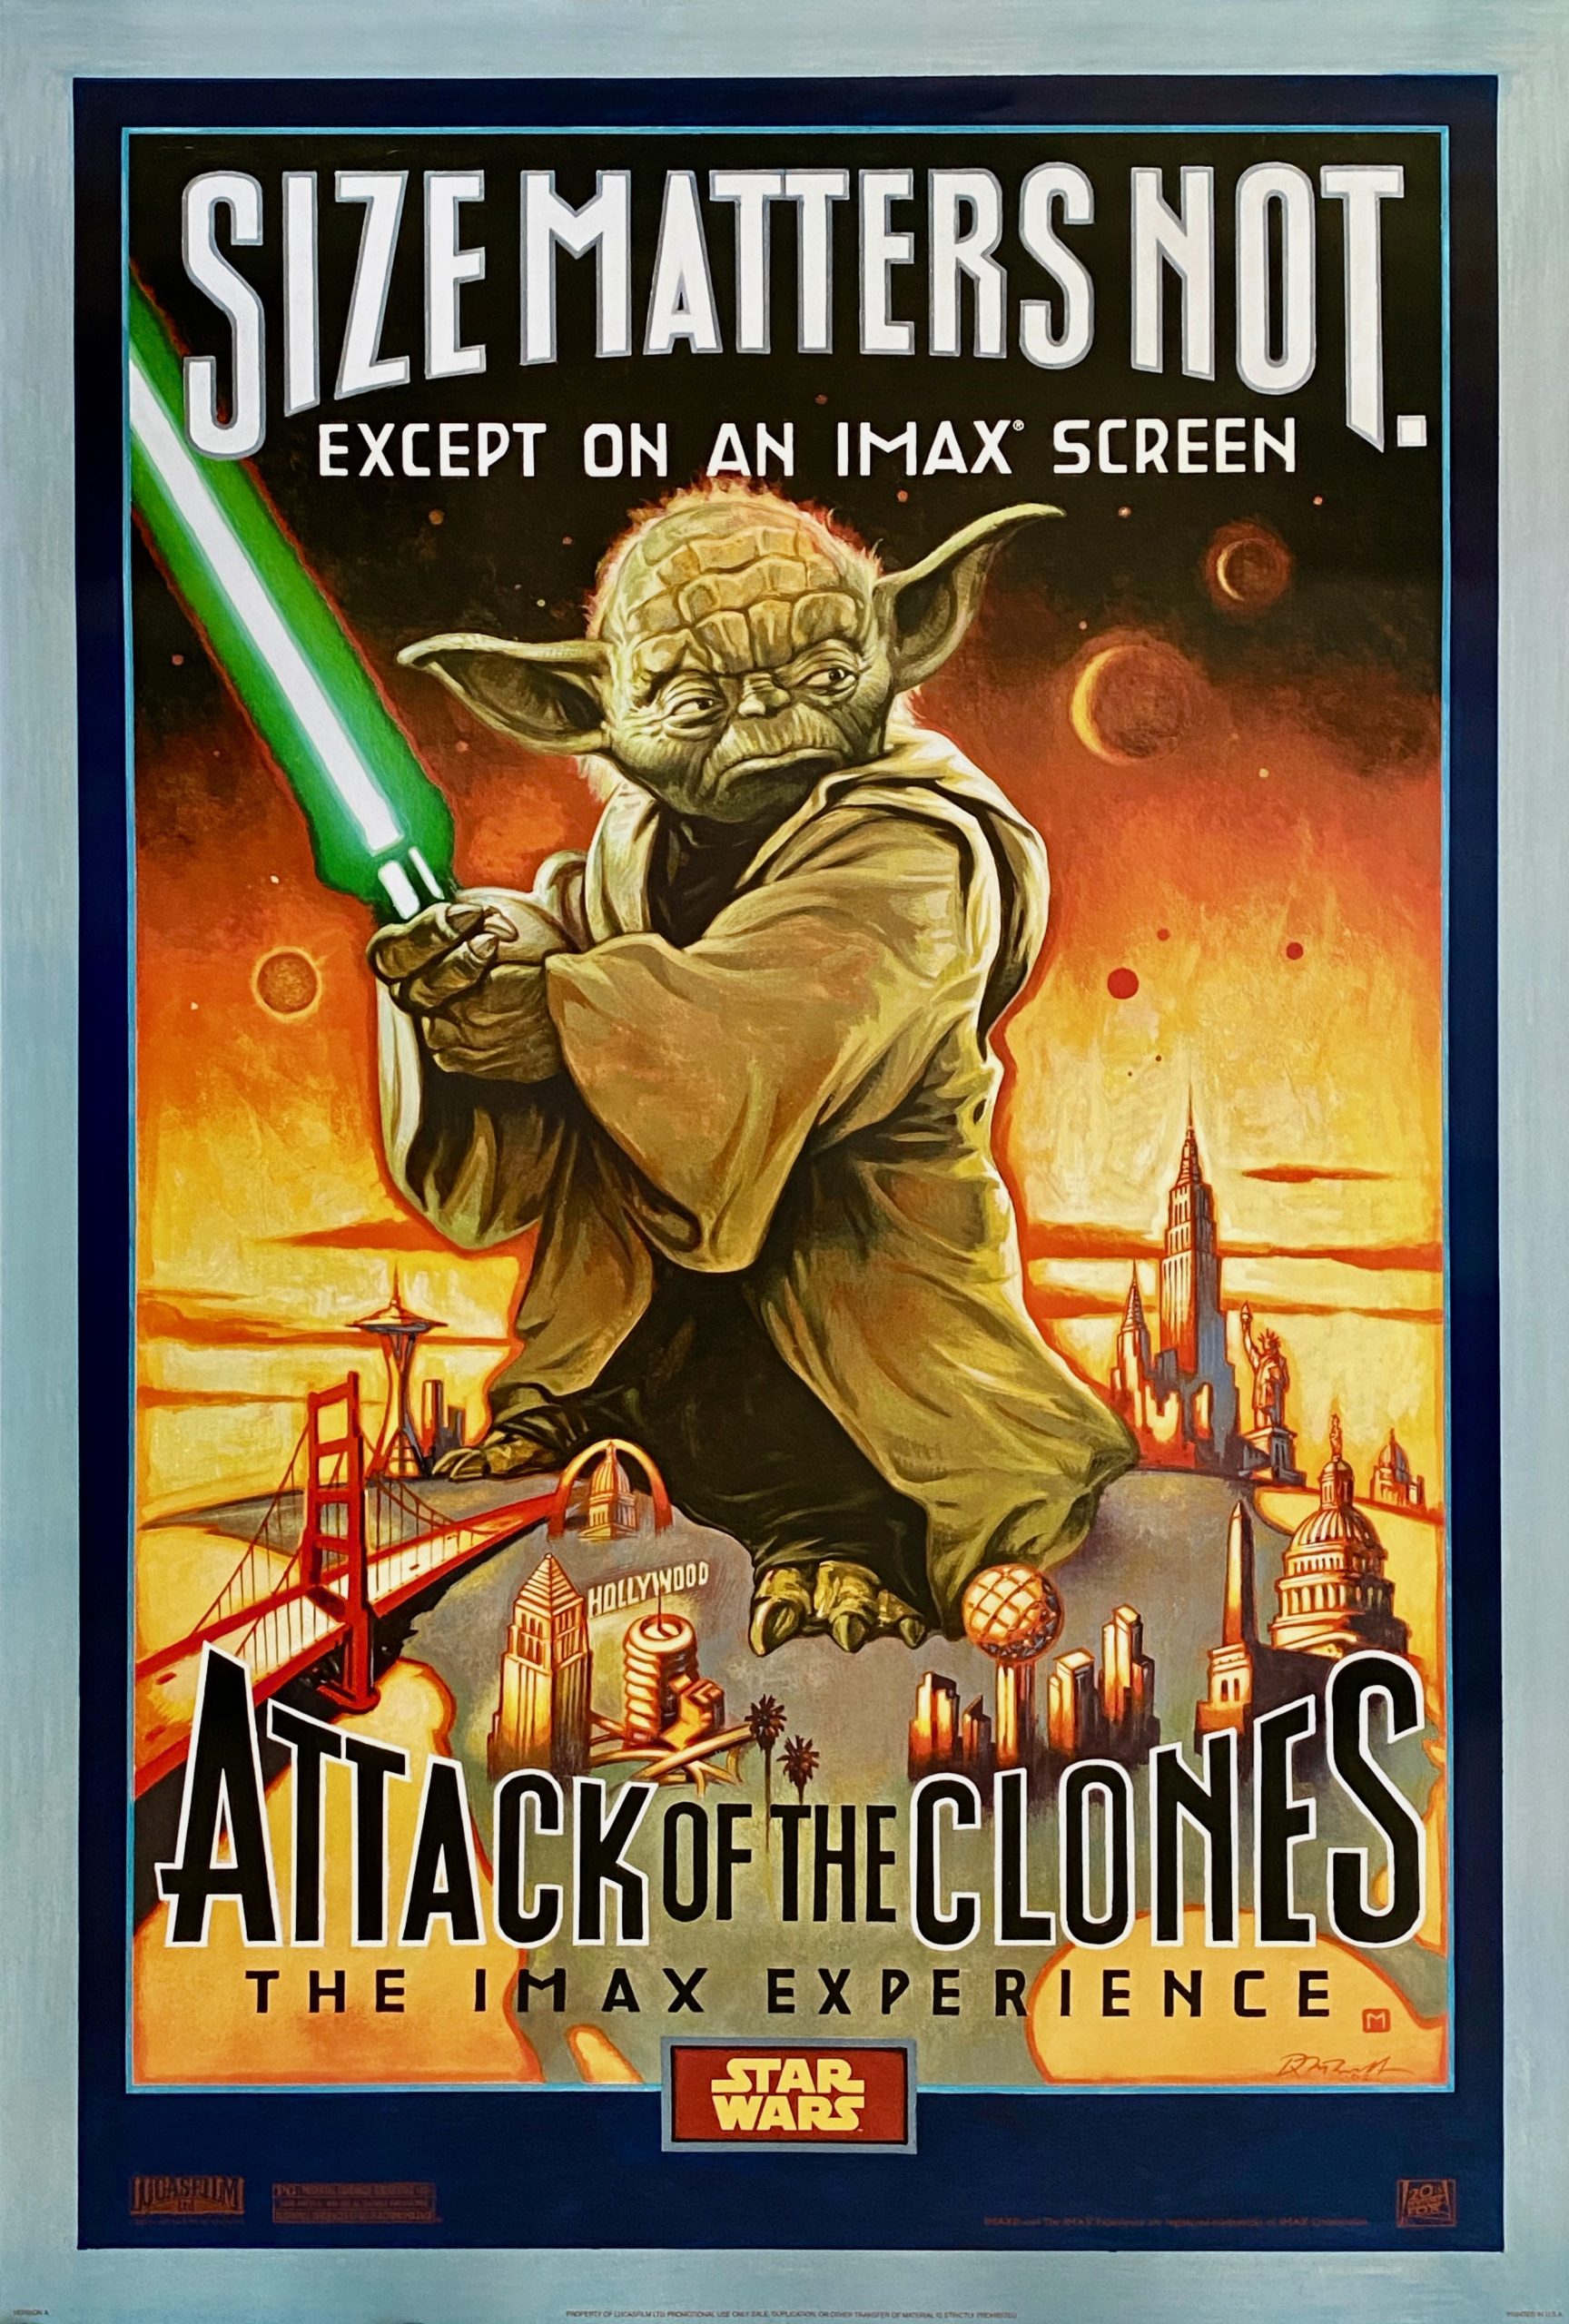 Vintage Star Wars Attack of the Clones Poster Episode 2 2002 24 x 36 inches